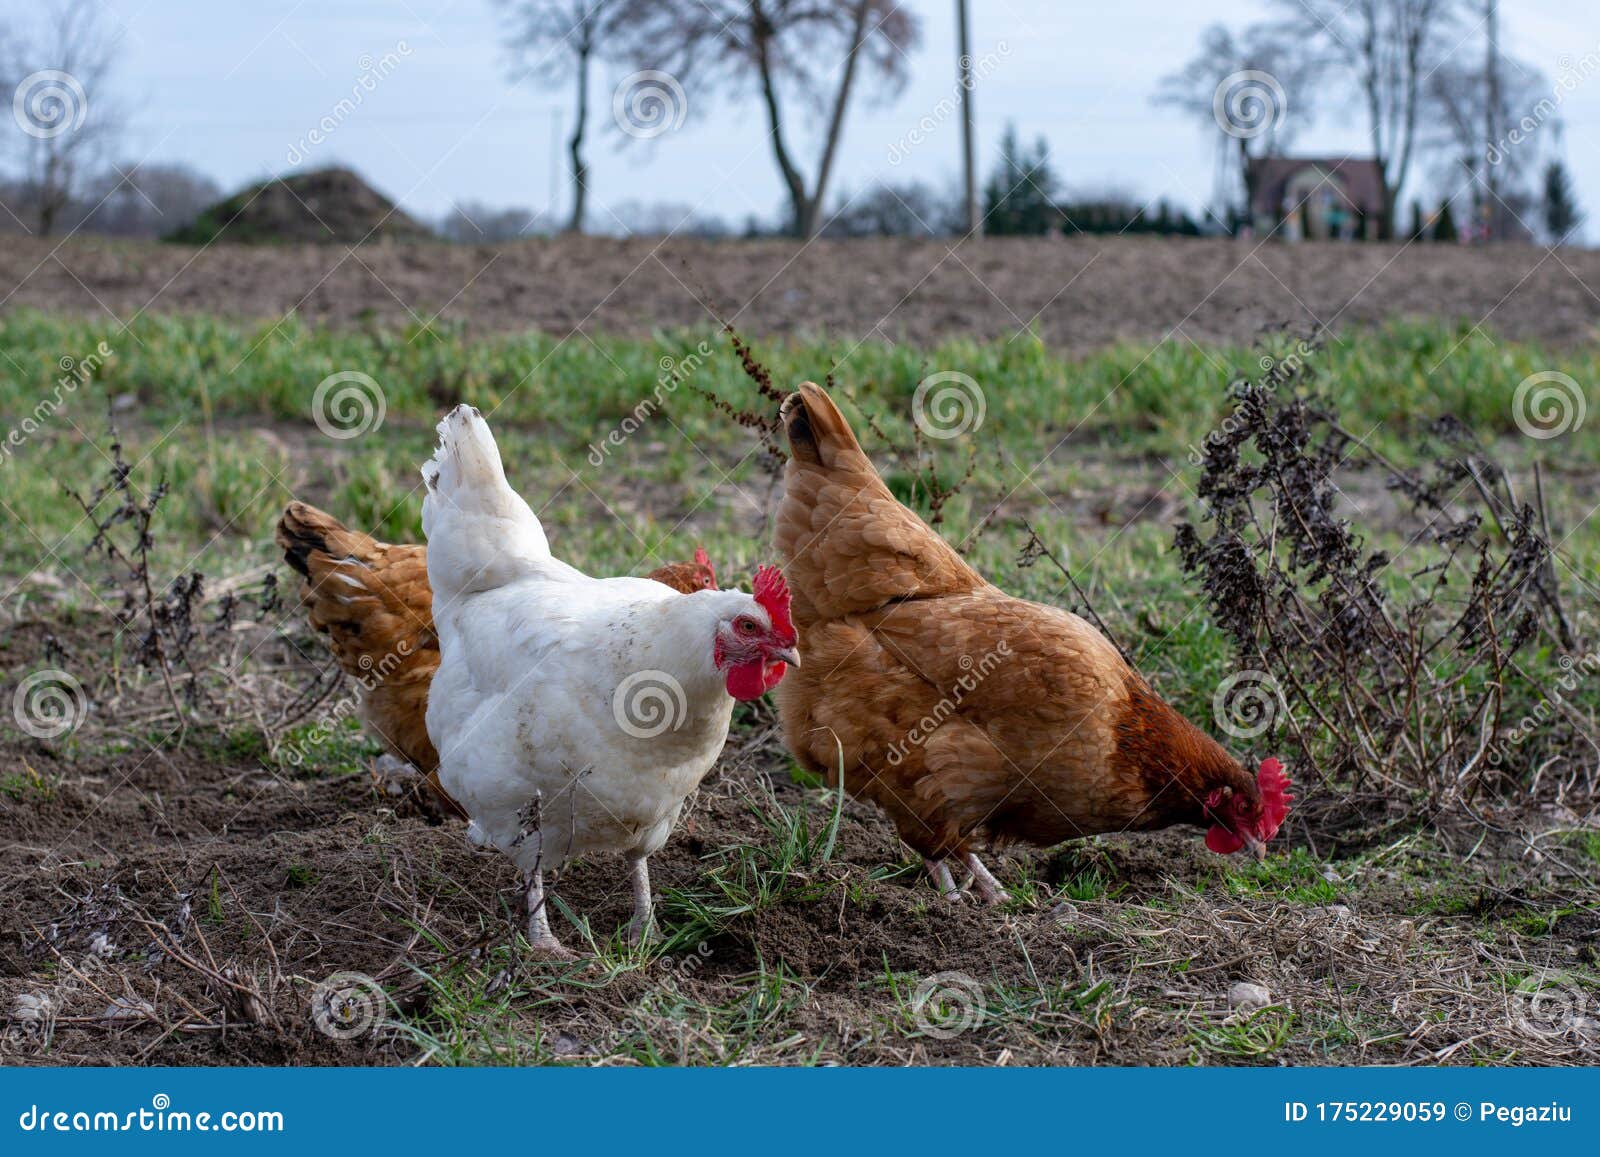 The definition of free-range chickens